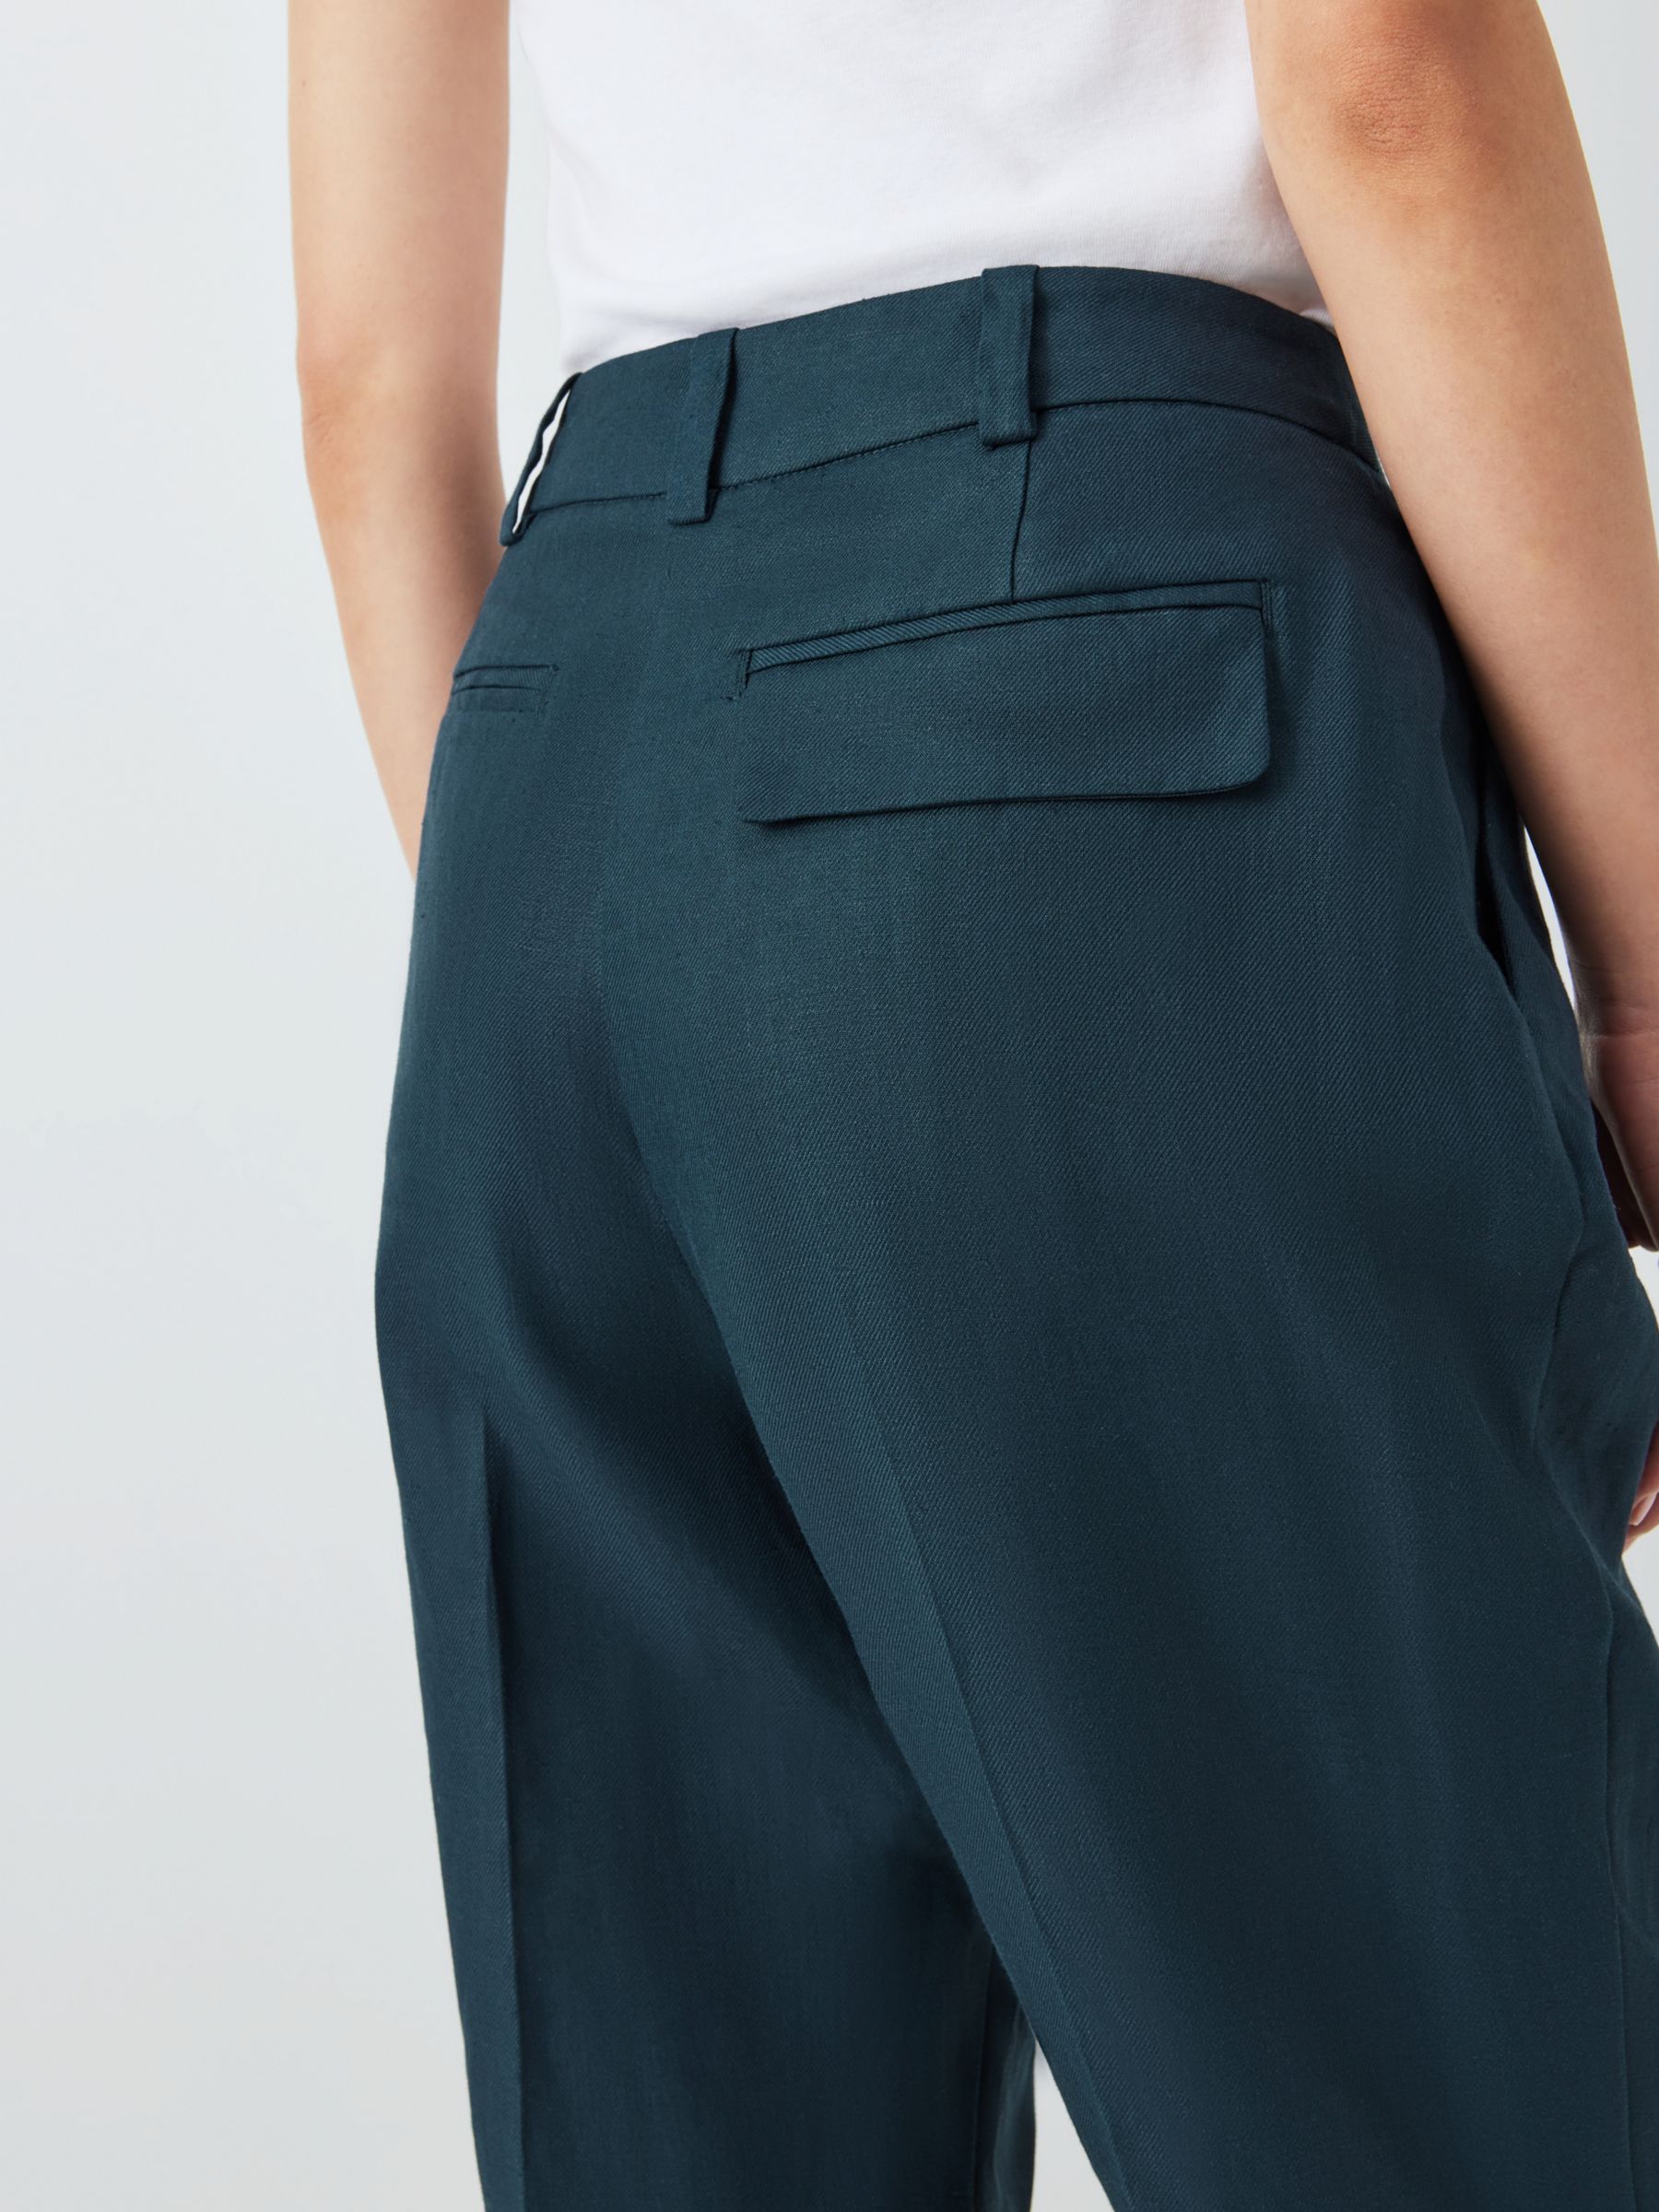 John Lewis Tapered Linen Trousers, Navy at John Lewis & Partners